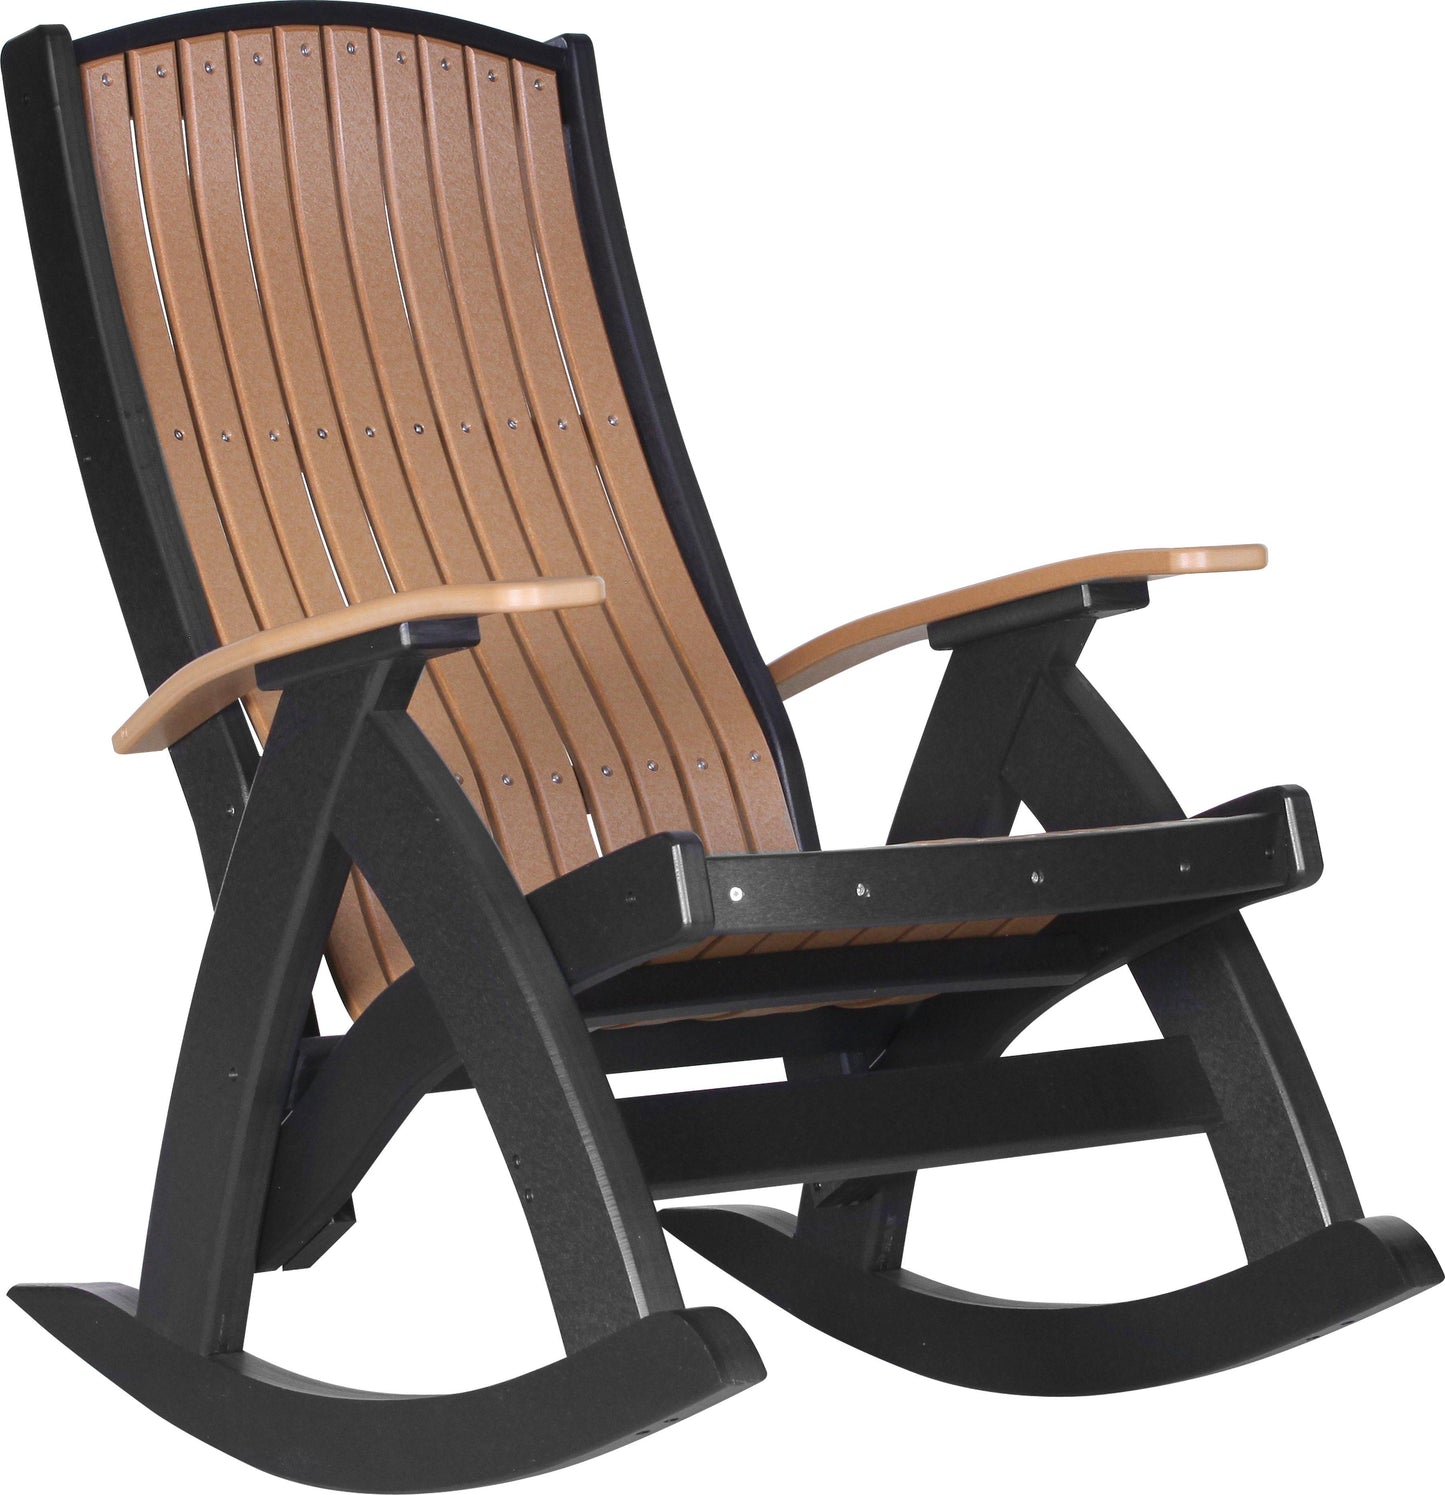 LuxCraft Recycled Plastic Comfort Rocking Chair - LEAD TIME TO SHIP 3 TO 4 WEEKS